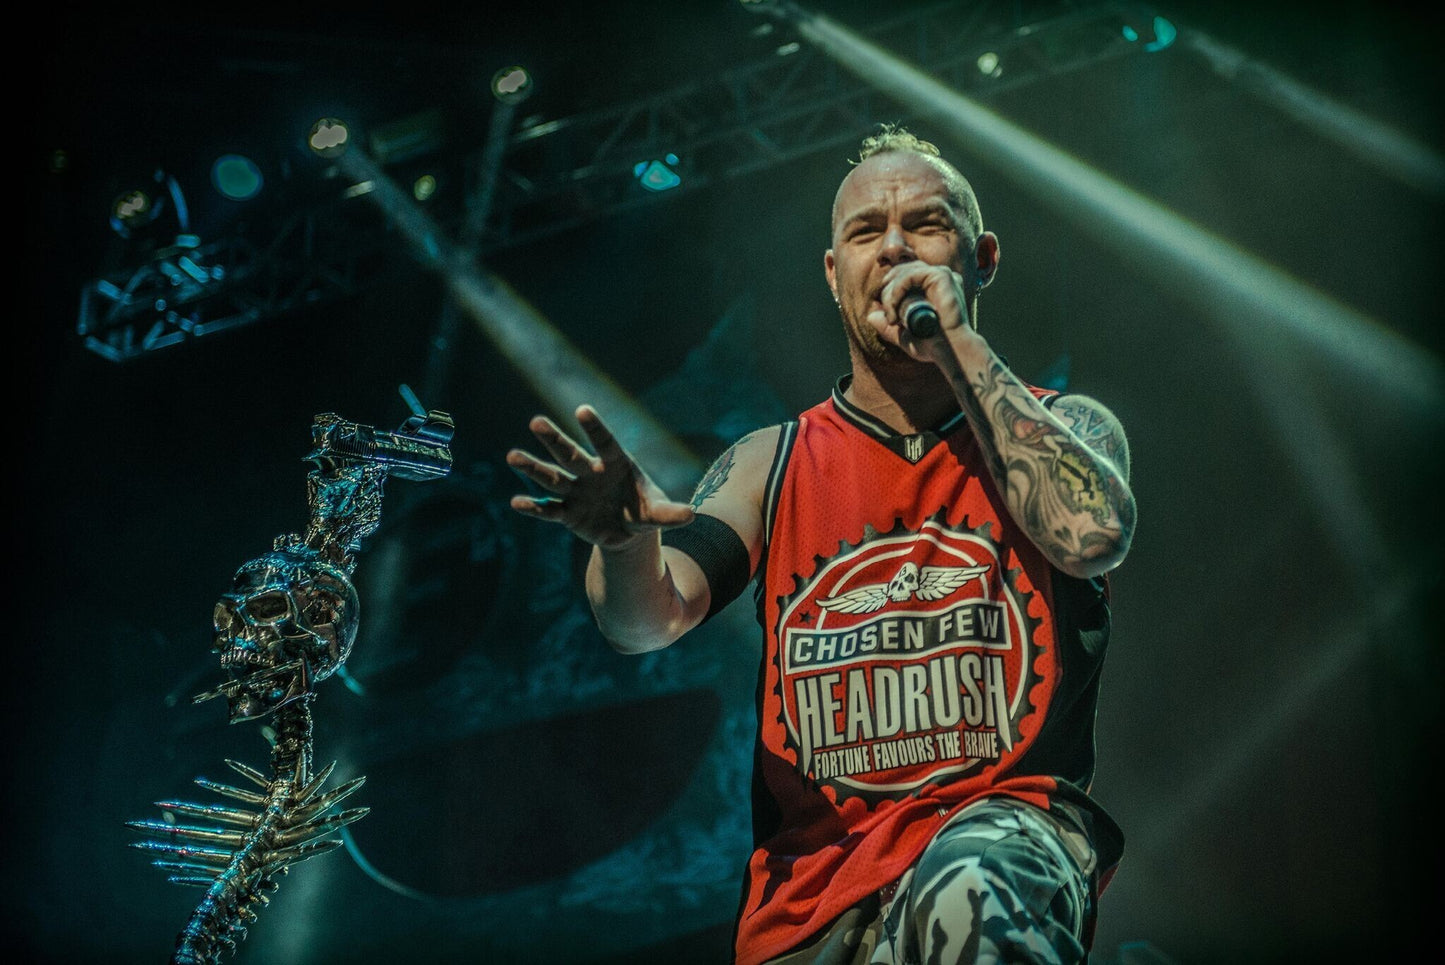 Five Finger Death Punch - Ivan Moody's Portrait Singing on Stage, USA, 2013 Poster (1/3)